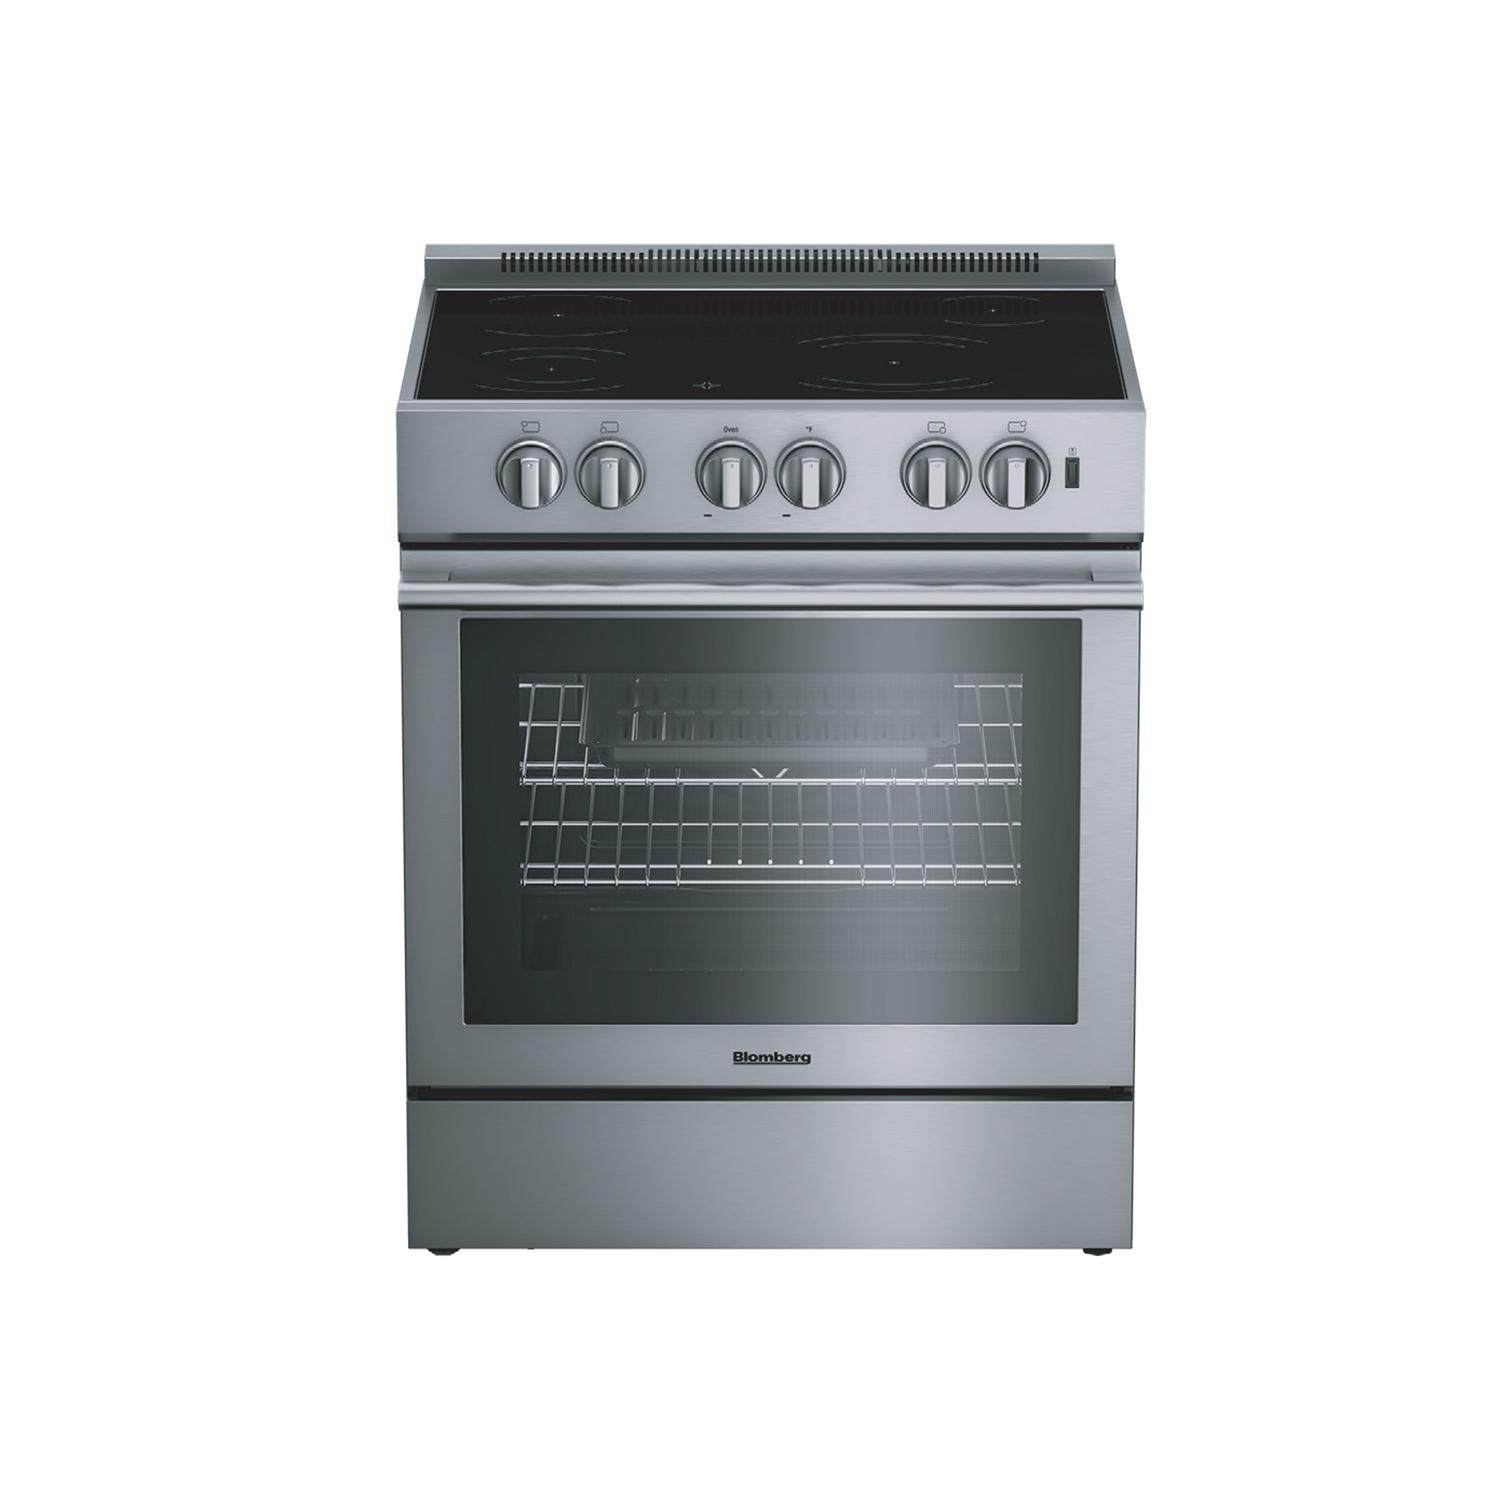 Blomberg Appliances 30in Induction range with 5.7 cu ft self clean oven, slide-in style